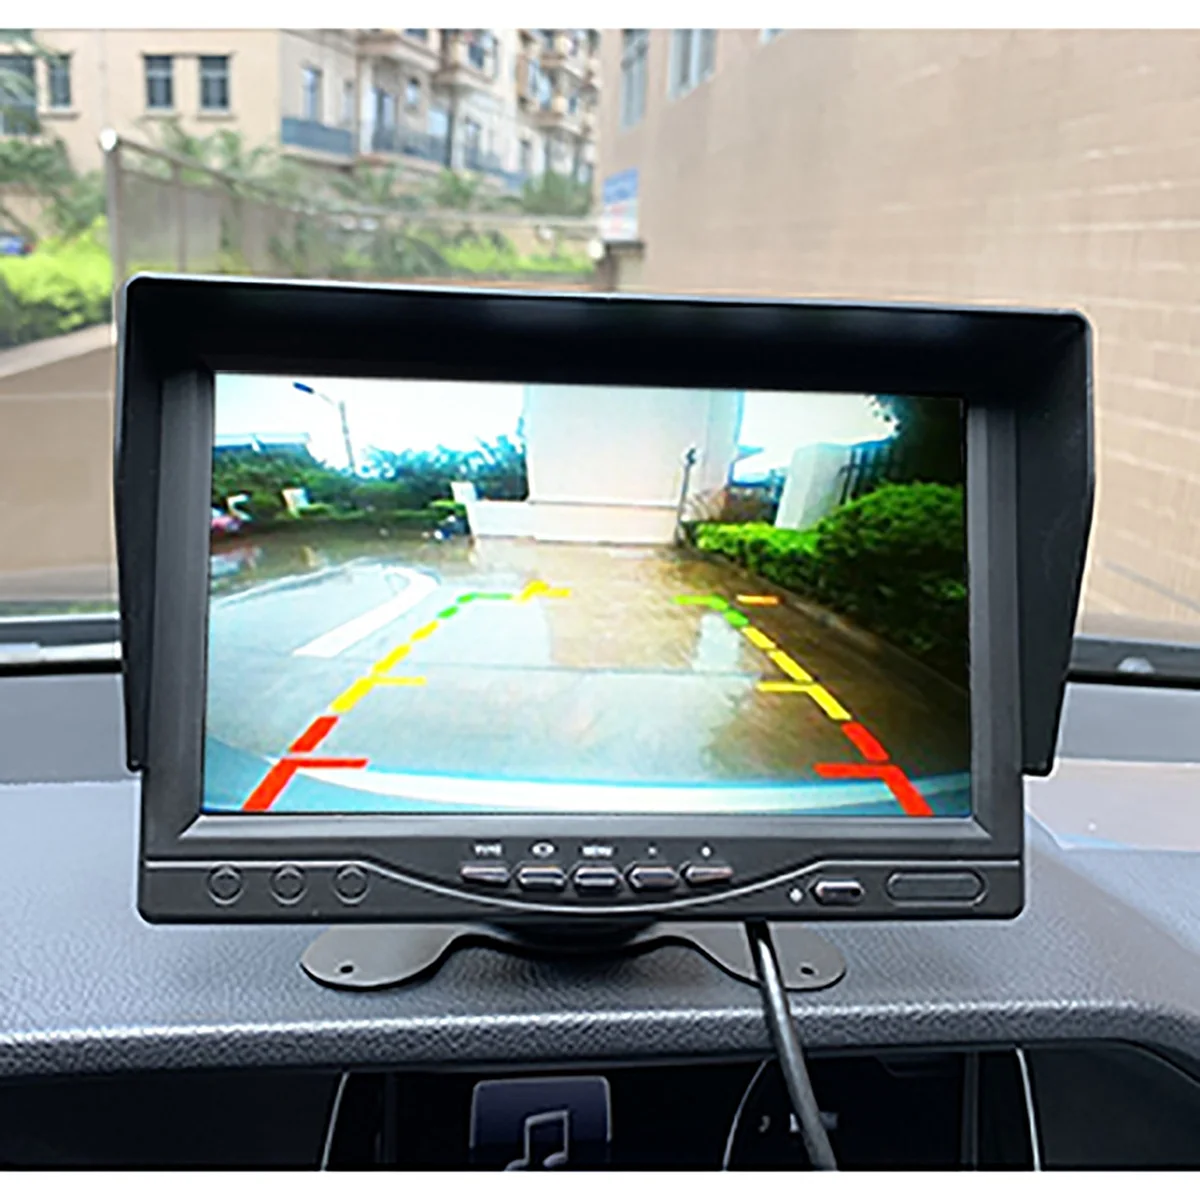 

7 Inch Truck Monitor HD Truck Backup Camera Vehicle Reverse Monitor Aviation Head Rearview Backup Reverse Cams